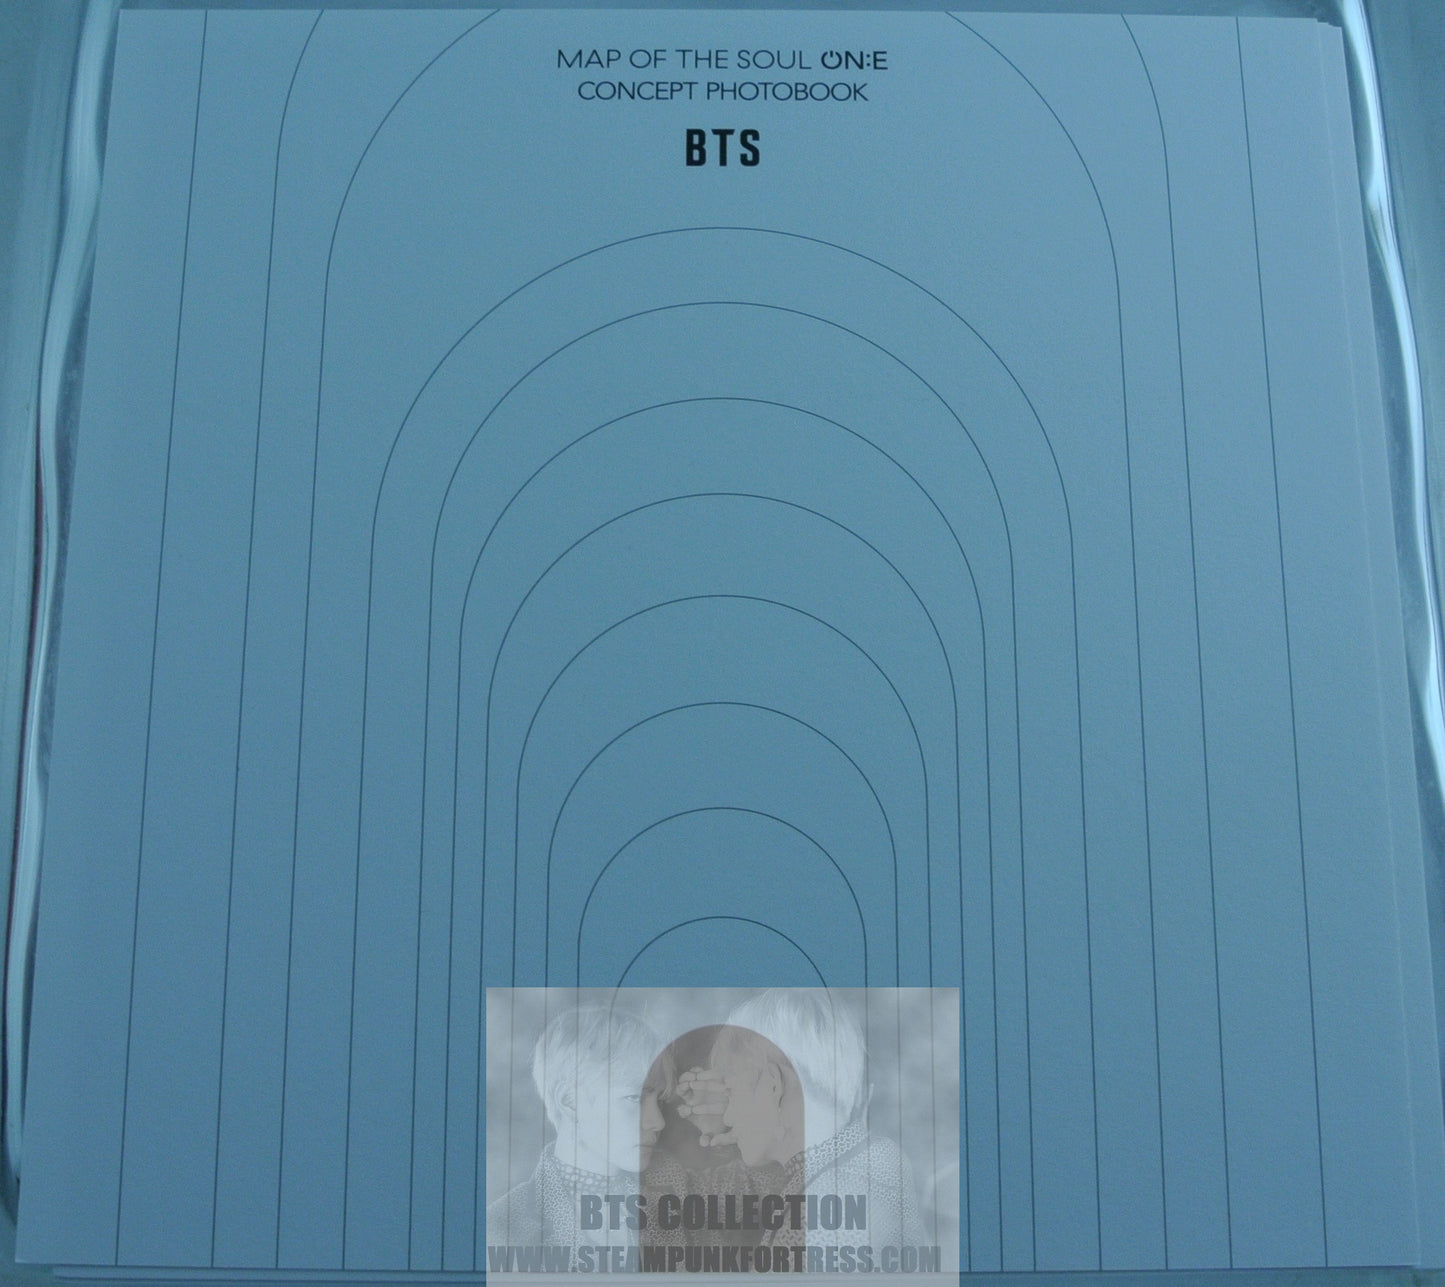 BTS SUGA MIN YOONGI YOON-GI MAP OF THE SOUL ON:E ONE CONCEPT BOOK SQUARE POSTCARD PHOTOCARD PHOTO CARD EXCLUSIVE LIMITED EDITION WITH BOOK SET ONLY NEW OFFICIAL MERCHANDISE